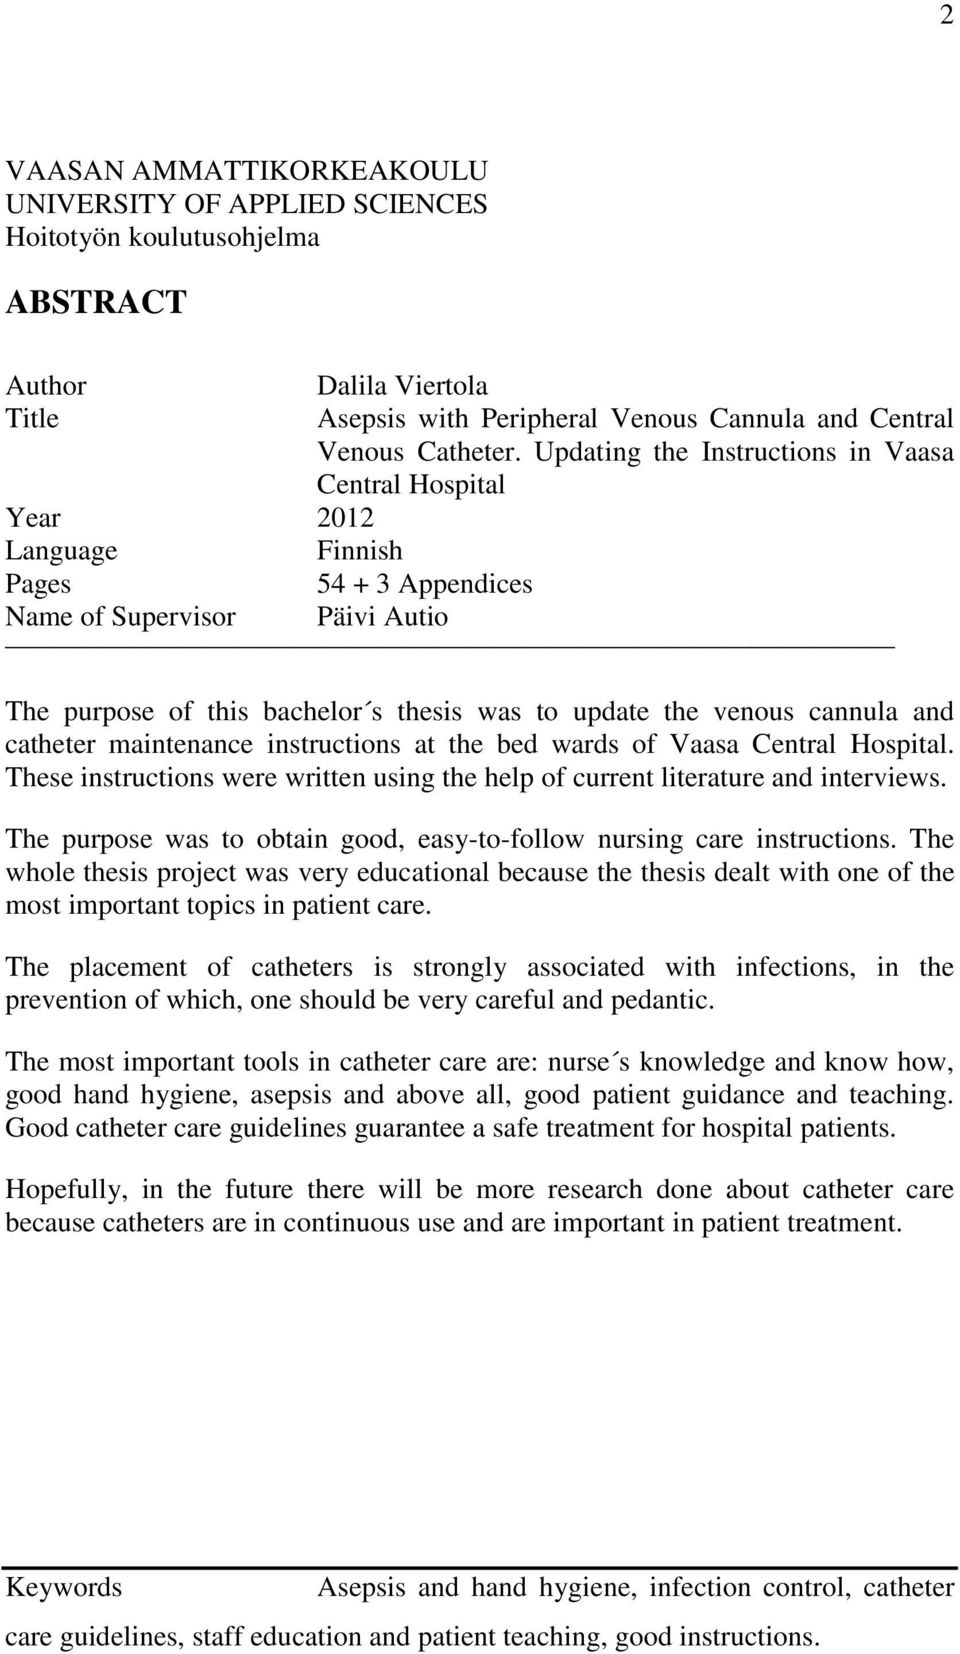 cannula and catheter maintenance instructions at the bed wards of Vaasa Central Hospital. These instructions were written using the help of current literature and interviews.